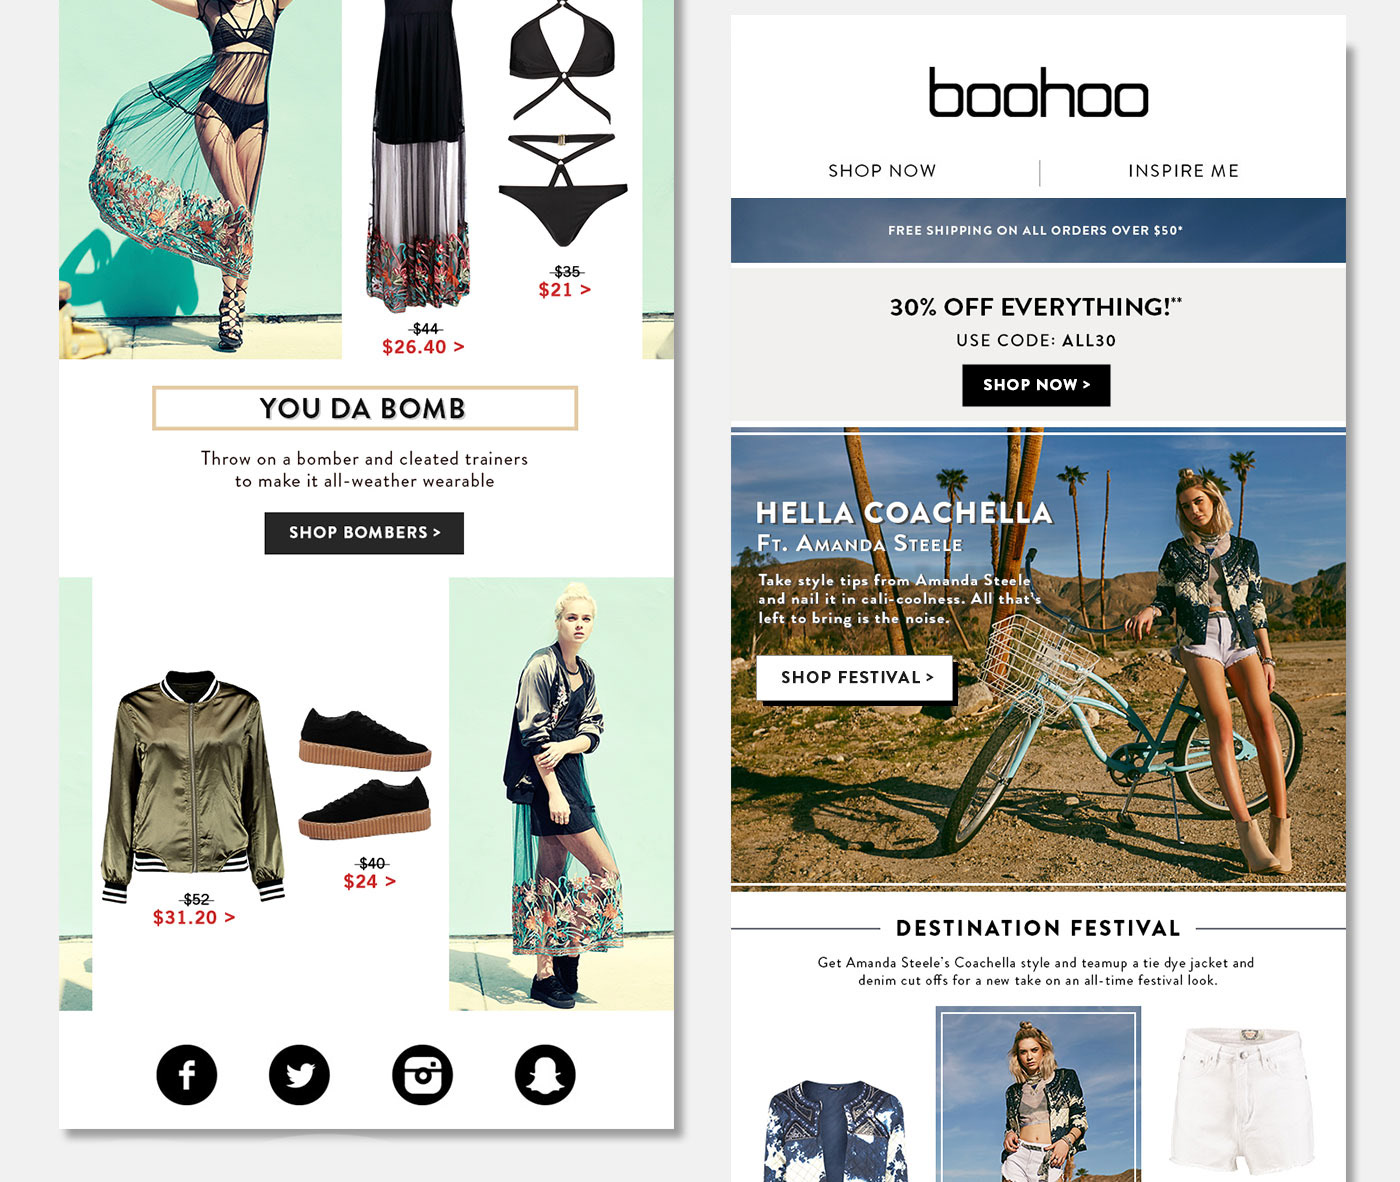 Email Design fashion design online fashion html email boohoo.com ILLUSTRATION  graphic design  user experience user interface